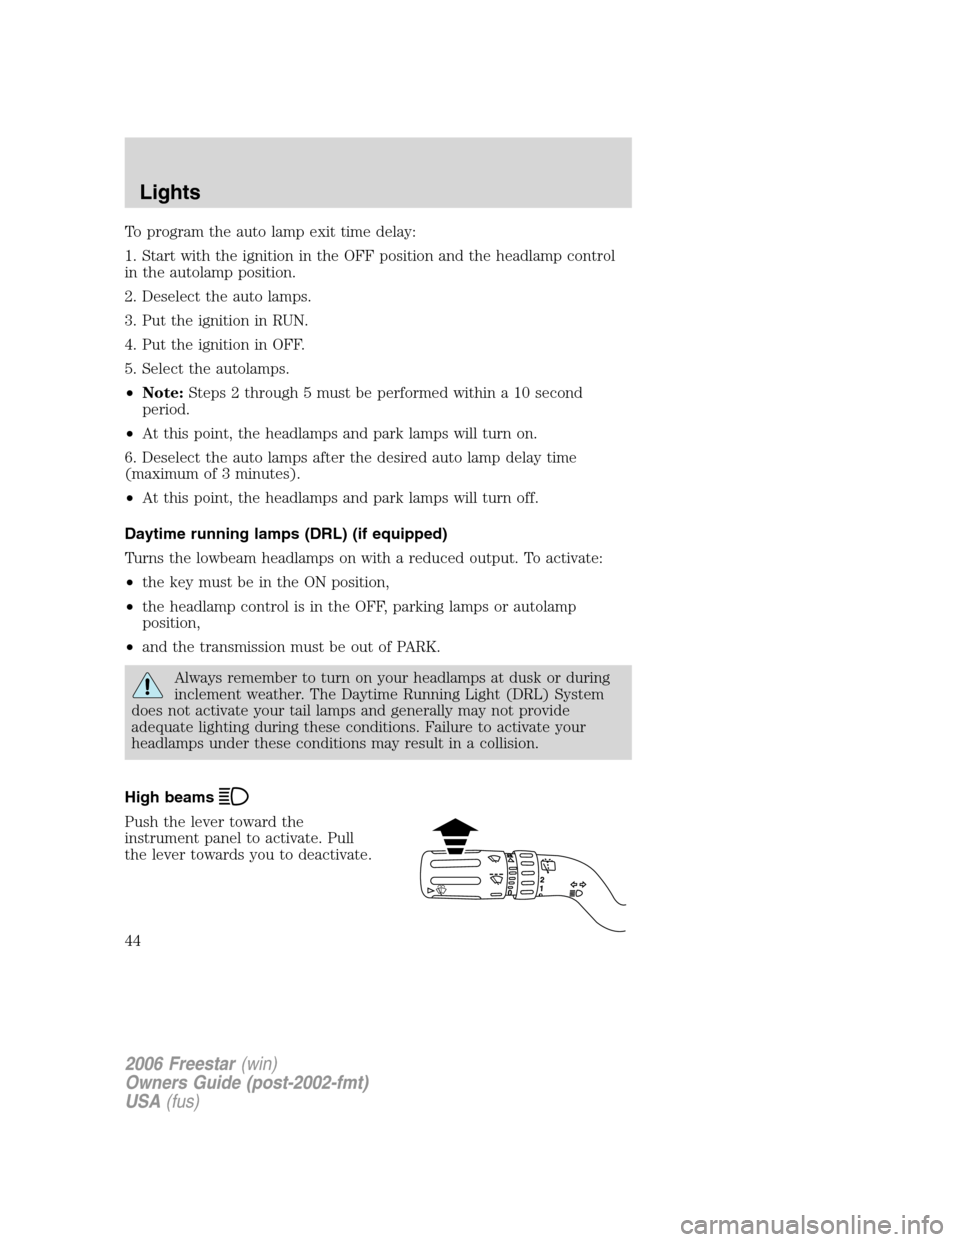 FORD FREESTAR 2006 1.G Owners Manual To program the auto lamp exit time delay:
1. Start with the ignition in the OFF position and the headlamp control
in the autolamp position.
2. Deselect the auto lamps.
3. Put the ignition in RUN.
4. P